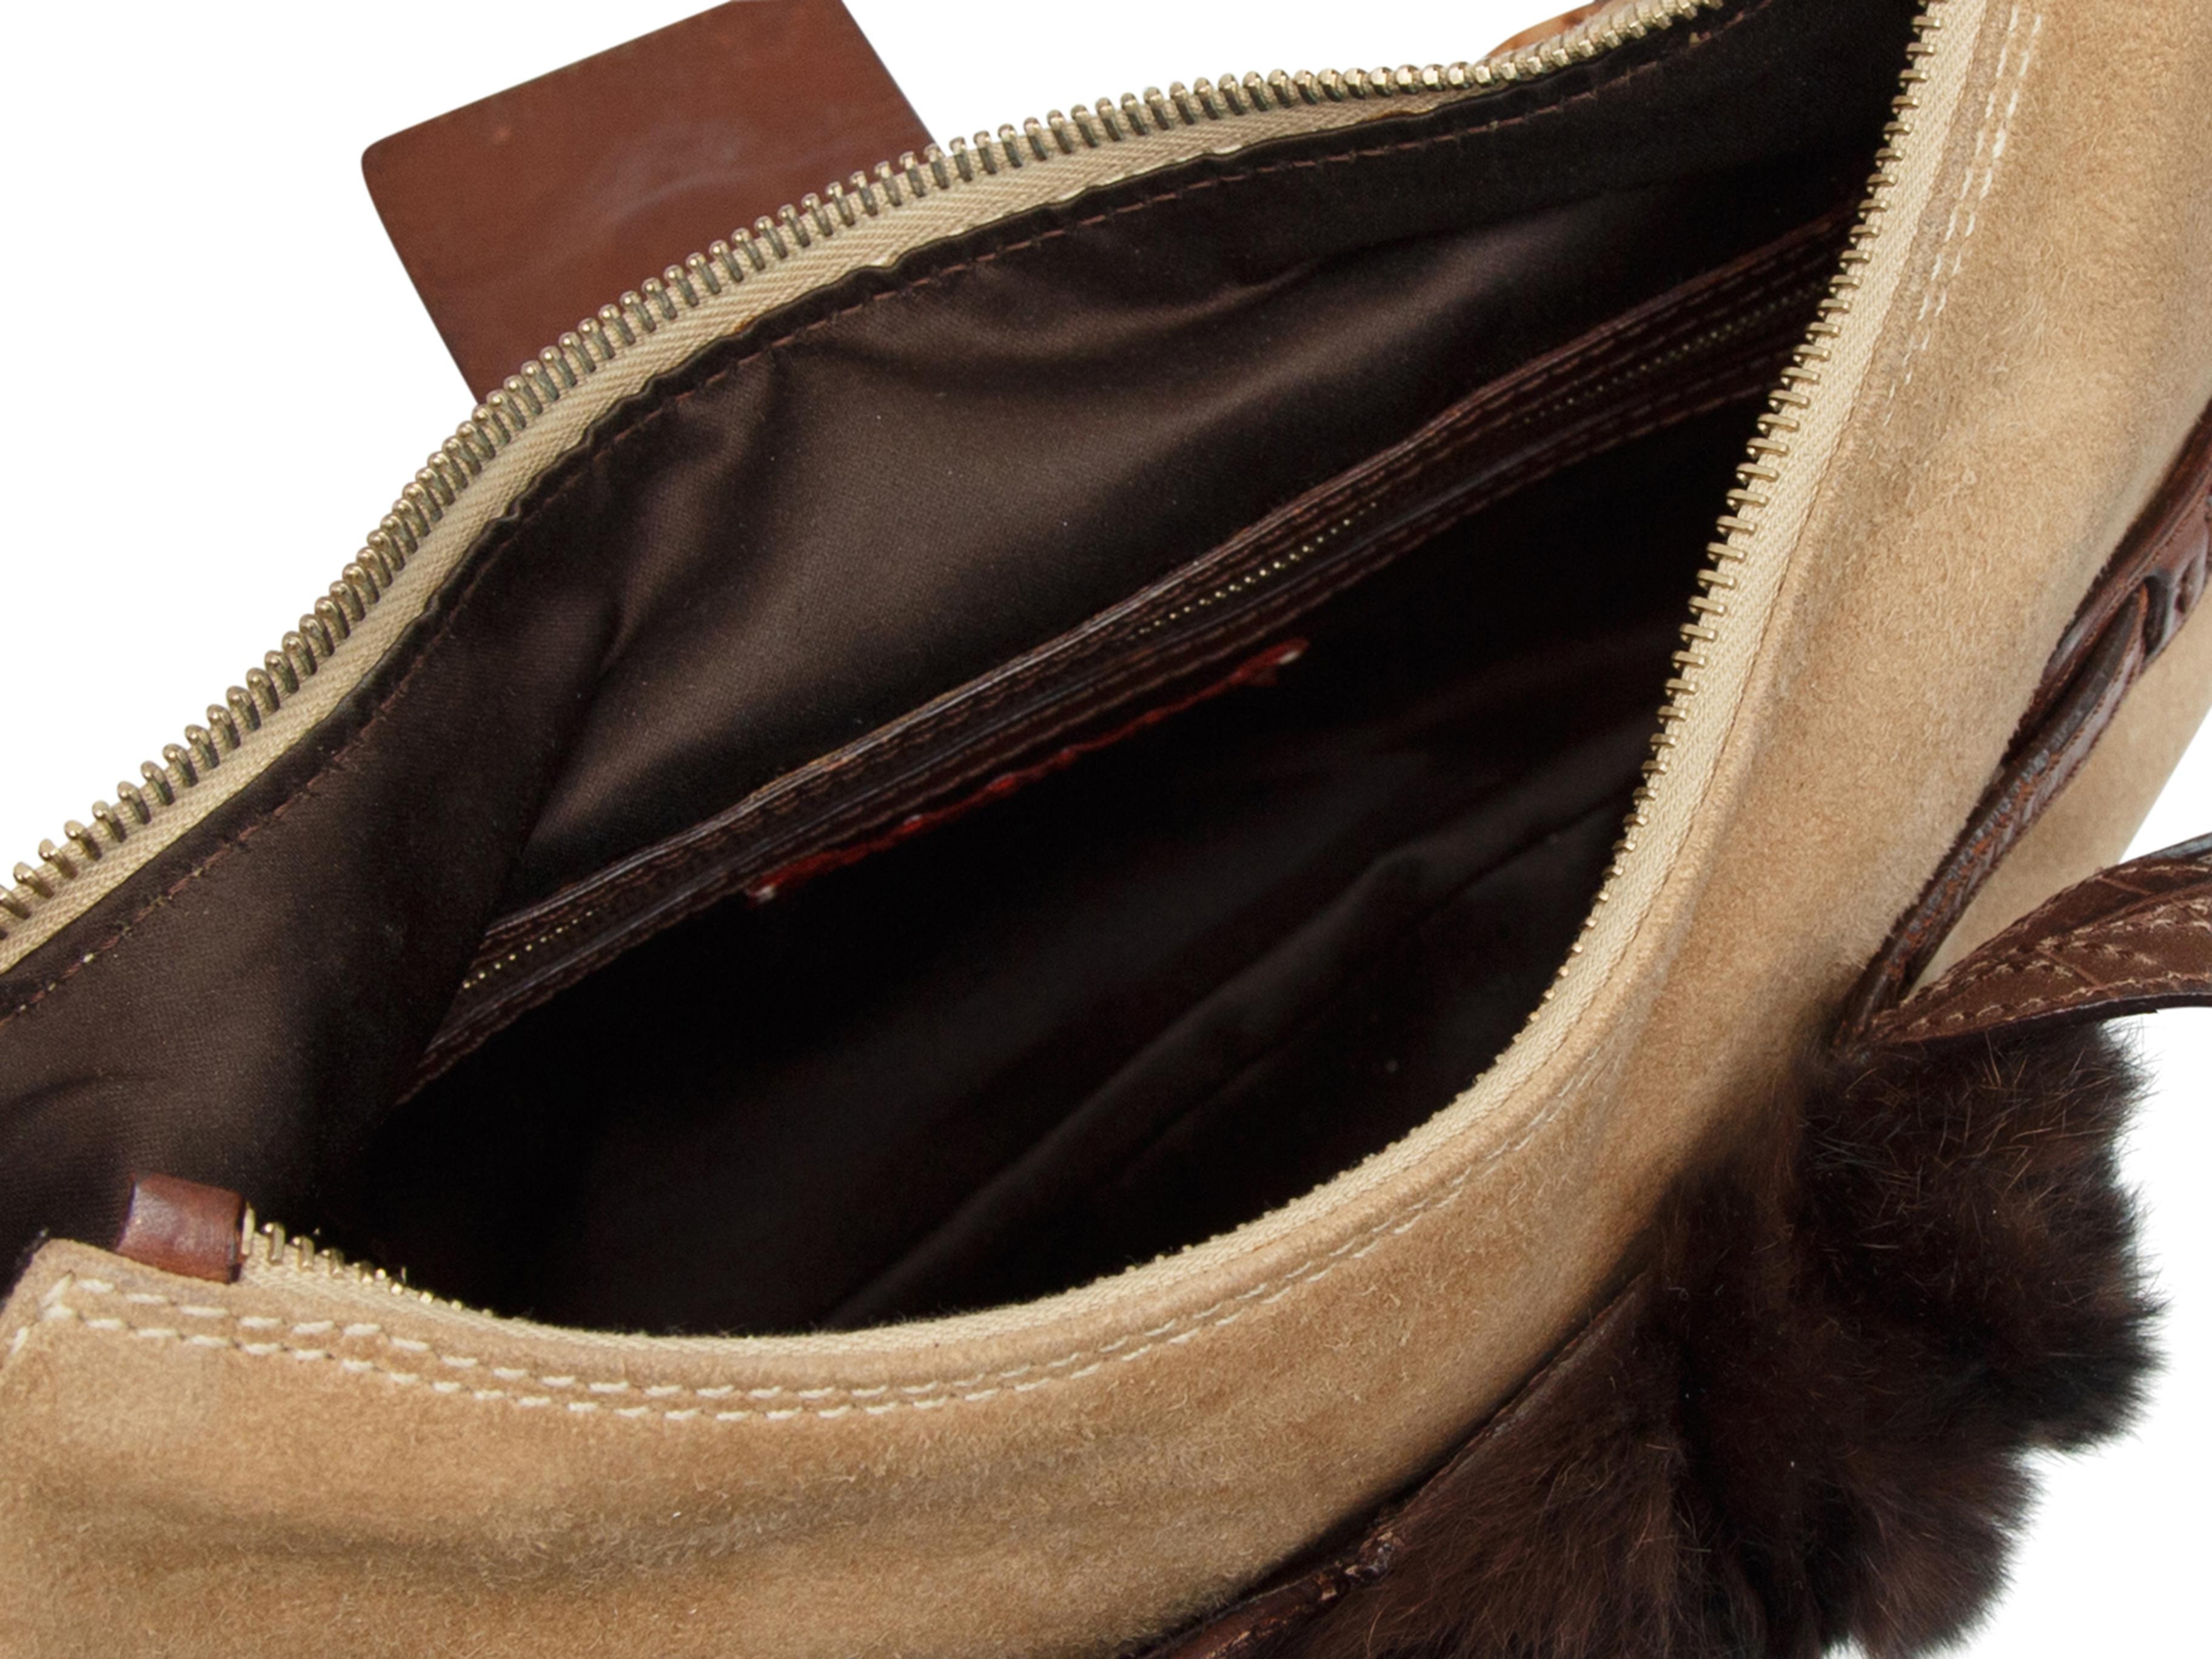 Product details: Tan suede shoulder bag with brown leather trim by Valentino. Tortoiseshell chain-link strap. Tonal fur accent at front. Zip closure at top. 11.5